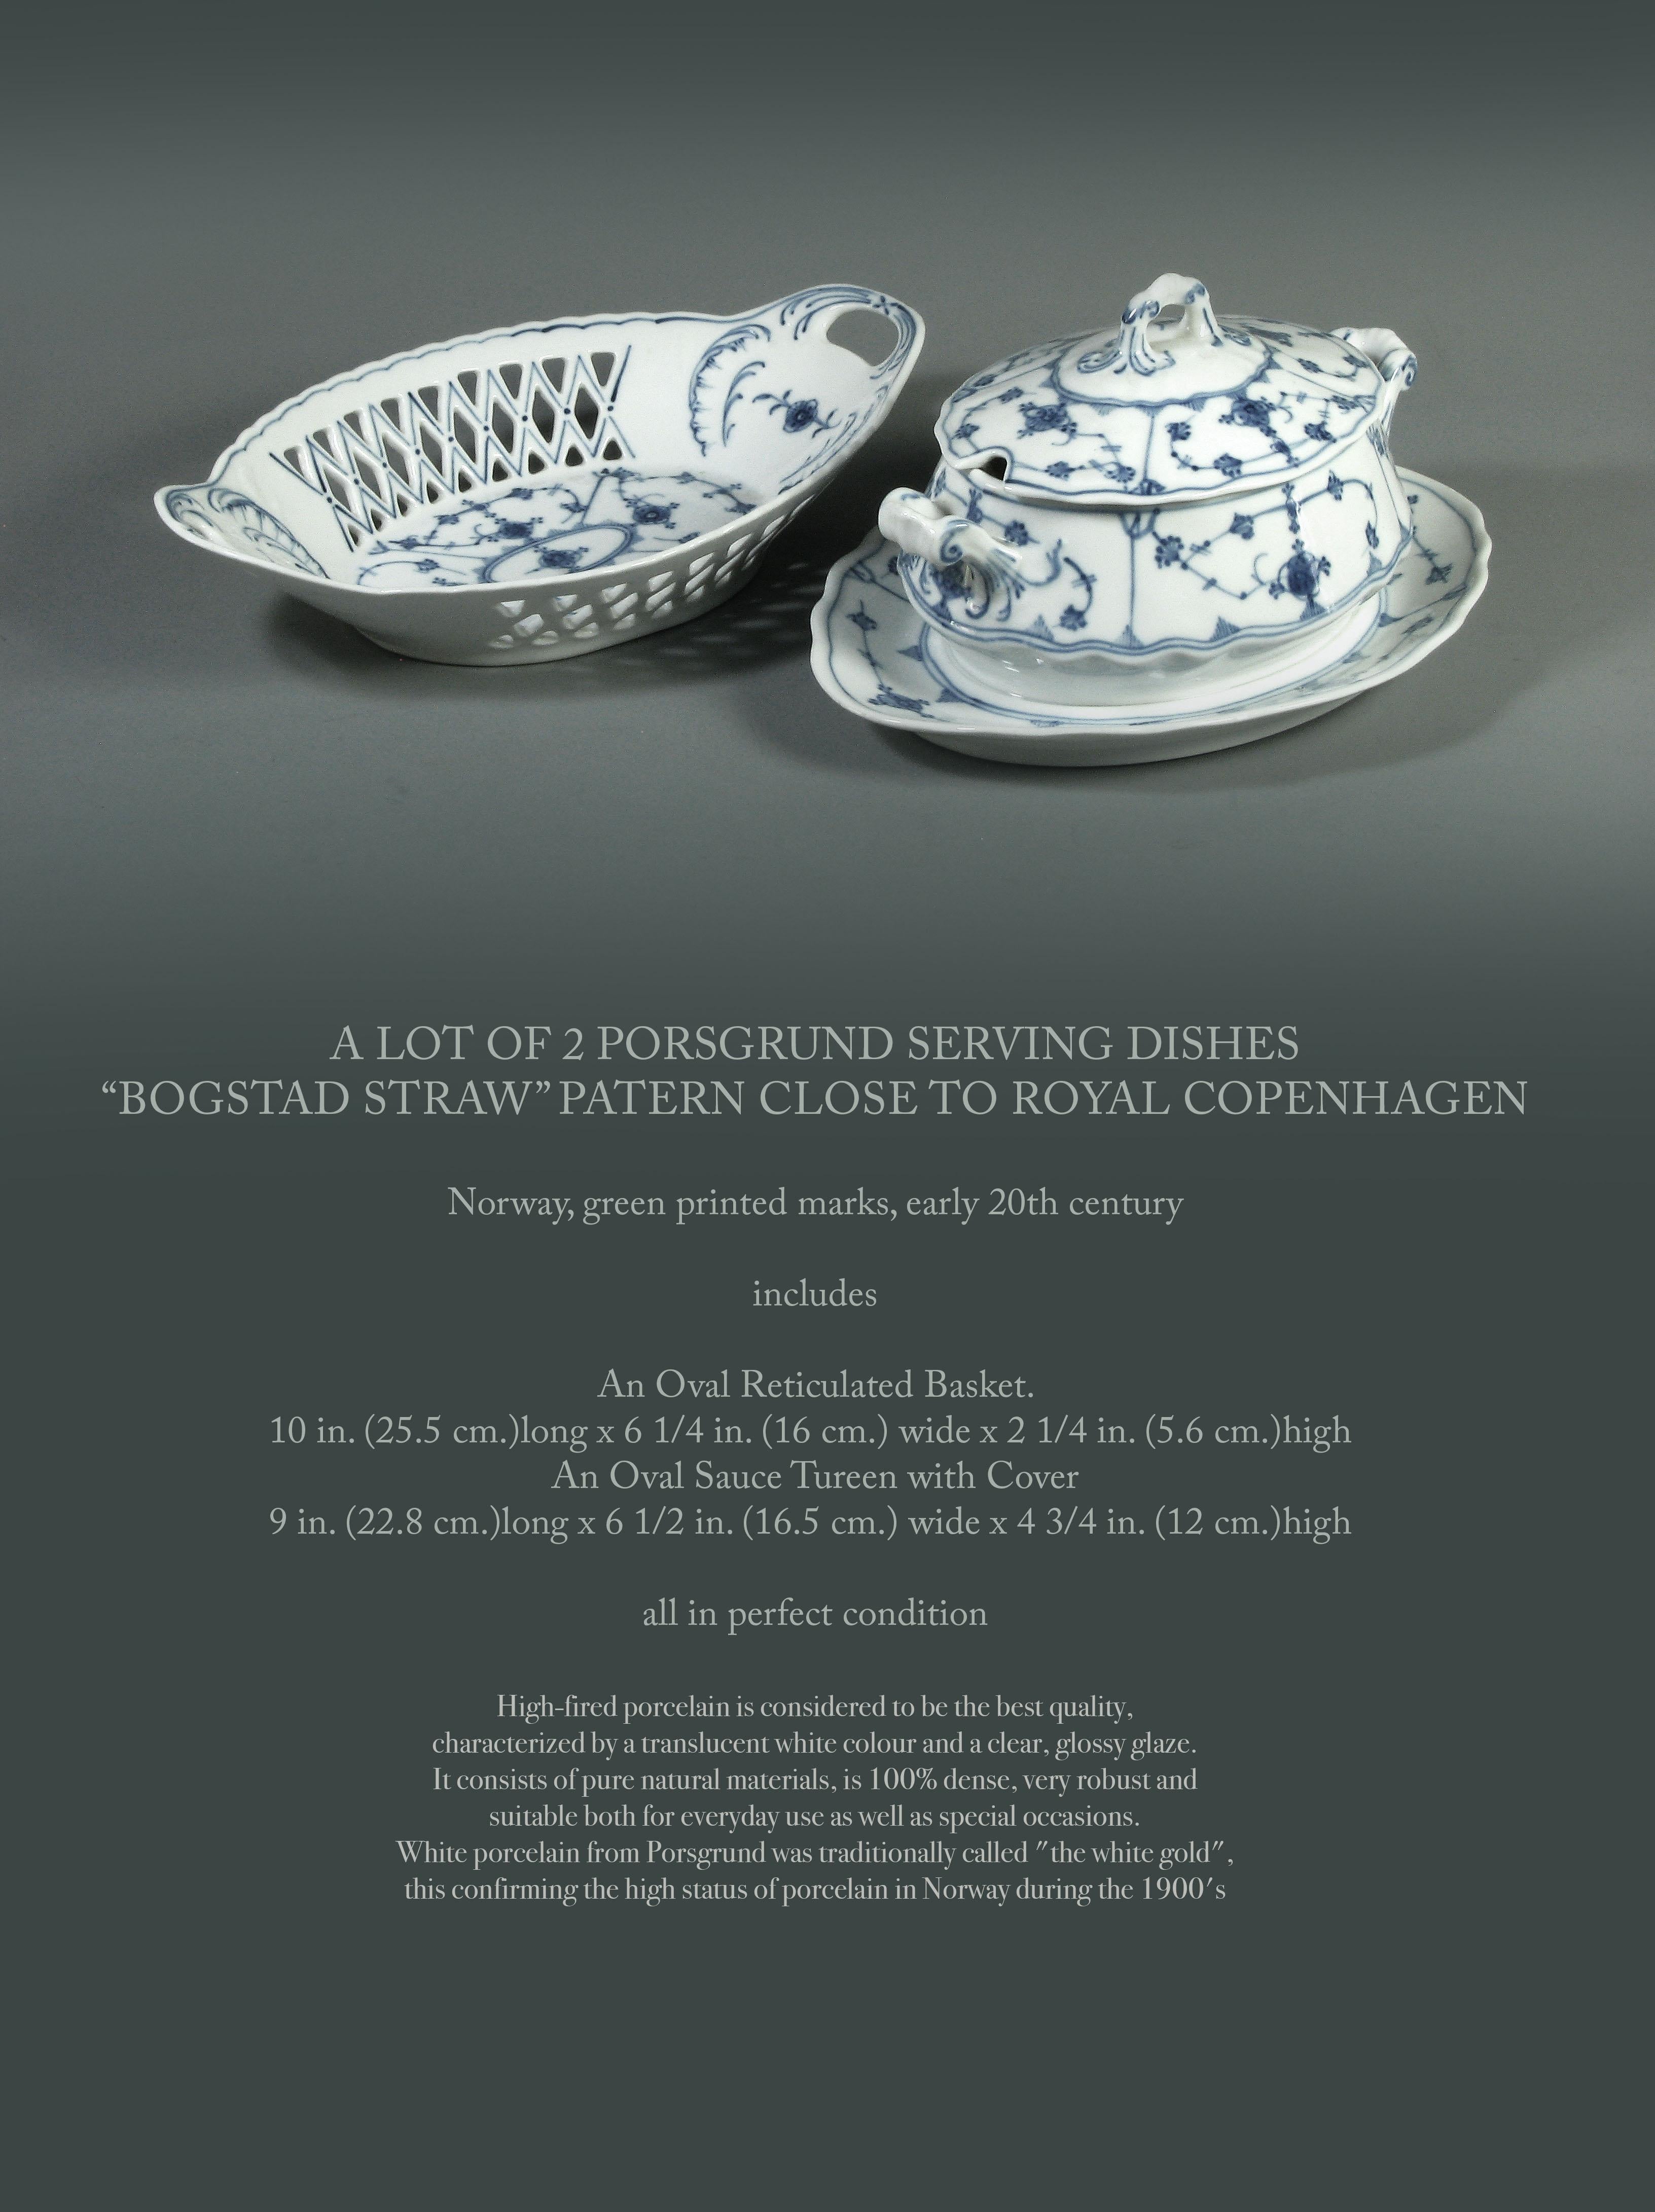 A LOT OF 2 PORSGRUND SERVING DISHES
“Bogstad Straw” patern close to Royal Copenhagen

Norway, green printed marks, early 20th century.

Includes;

An Oval Reticulated Basket.
10